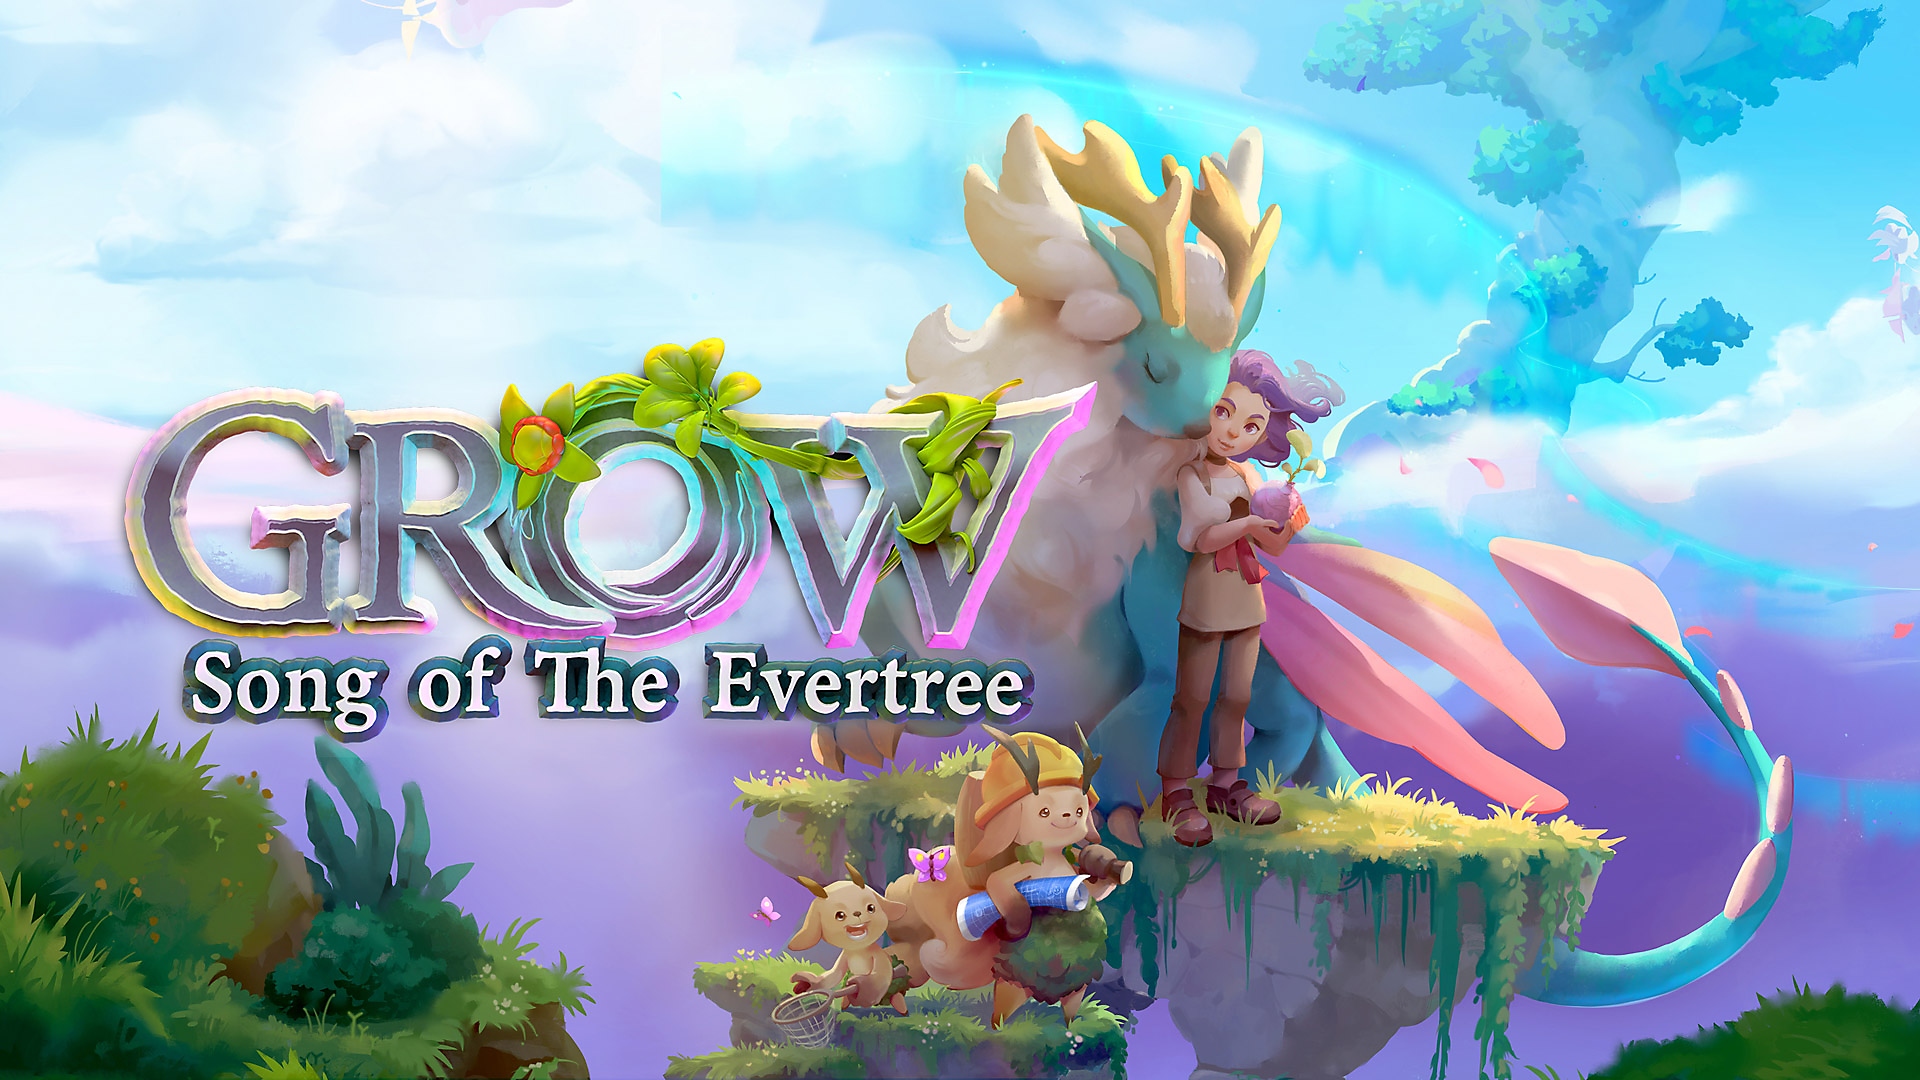 『Grow: Song of the Evertree』ローンチトレーラー